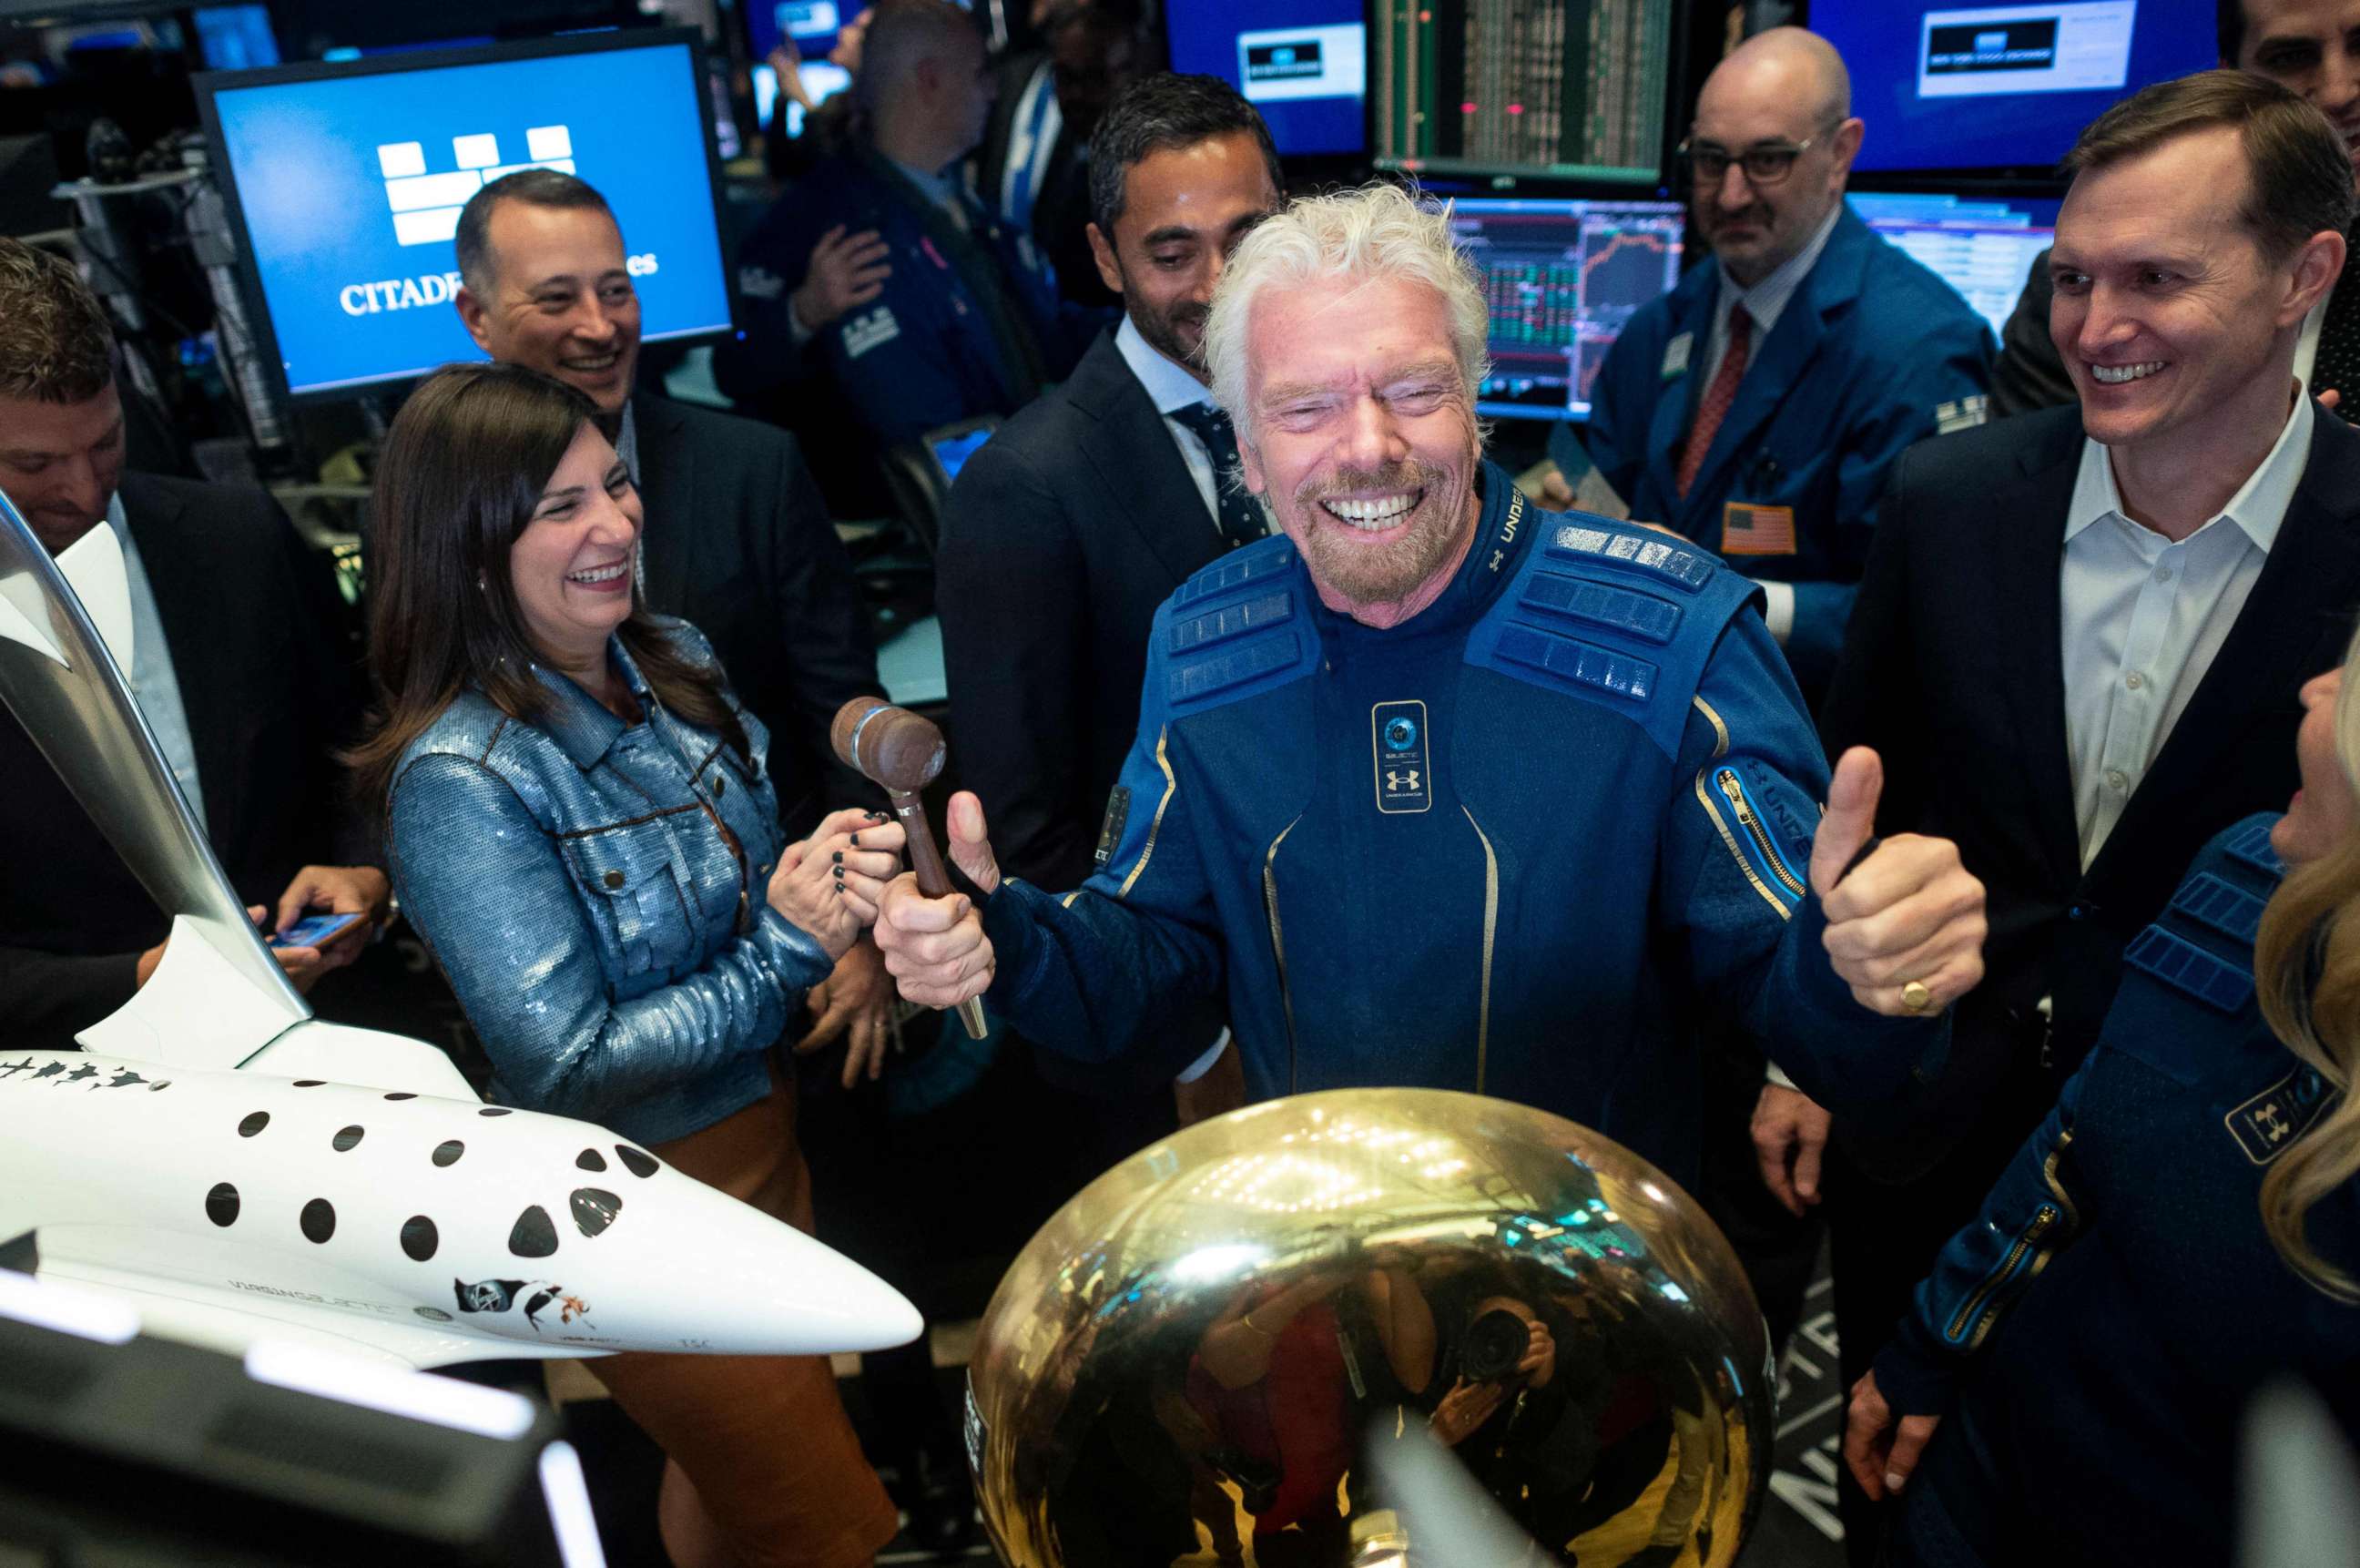 PHOTO: In this file photo taken on Oct. 28, 2019, Richard Branson, founder of Virgin Galactic poses next to George T. Whitesides, CEO of Virgin Galactic Holdings after ringing the bell at the New York Stock Exchange in New York City.